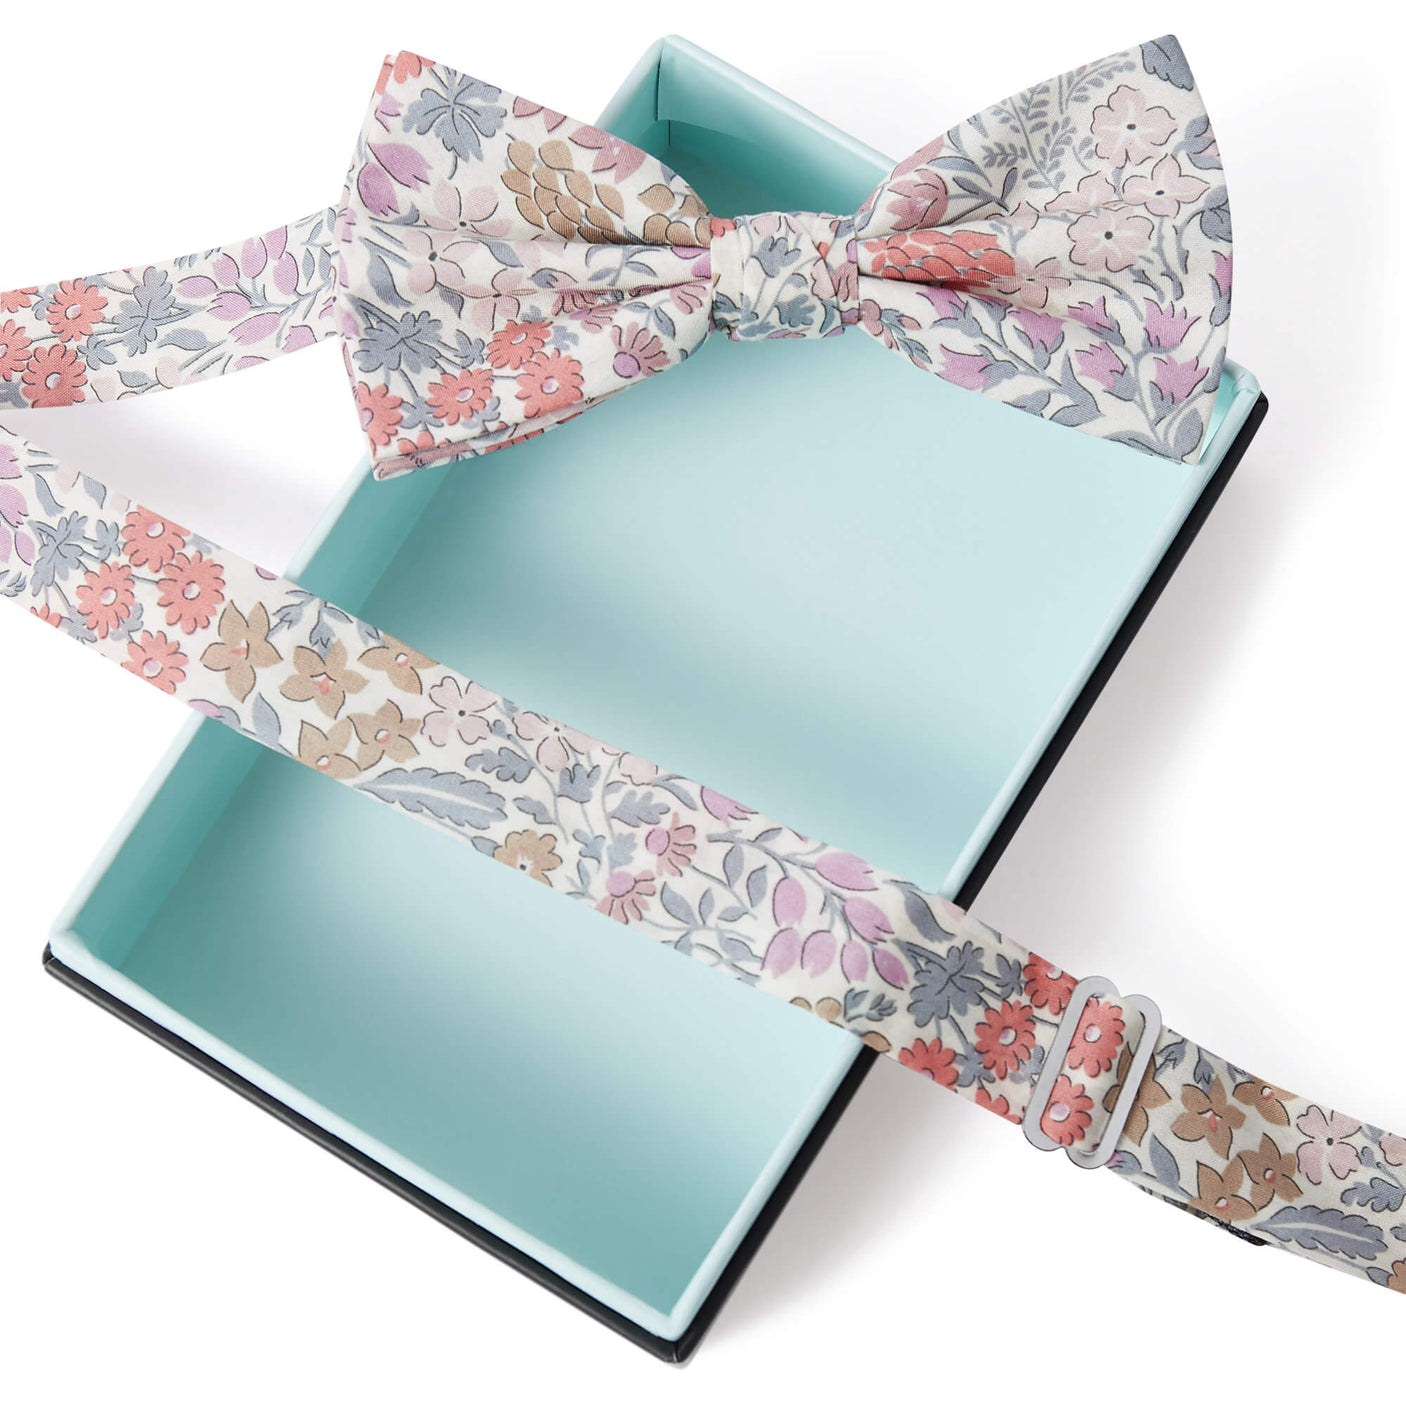 Men's bow tie Liberty fabric Sweet May Pink / Green